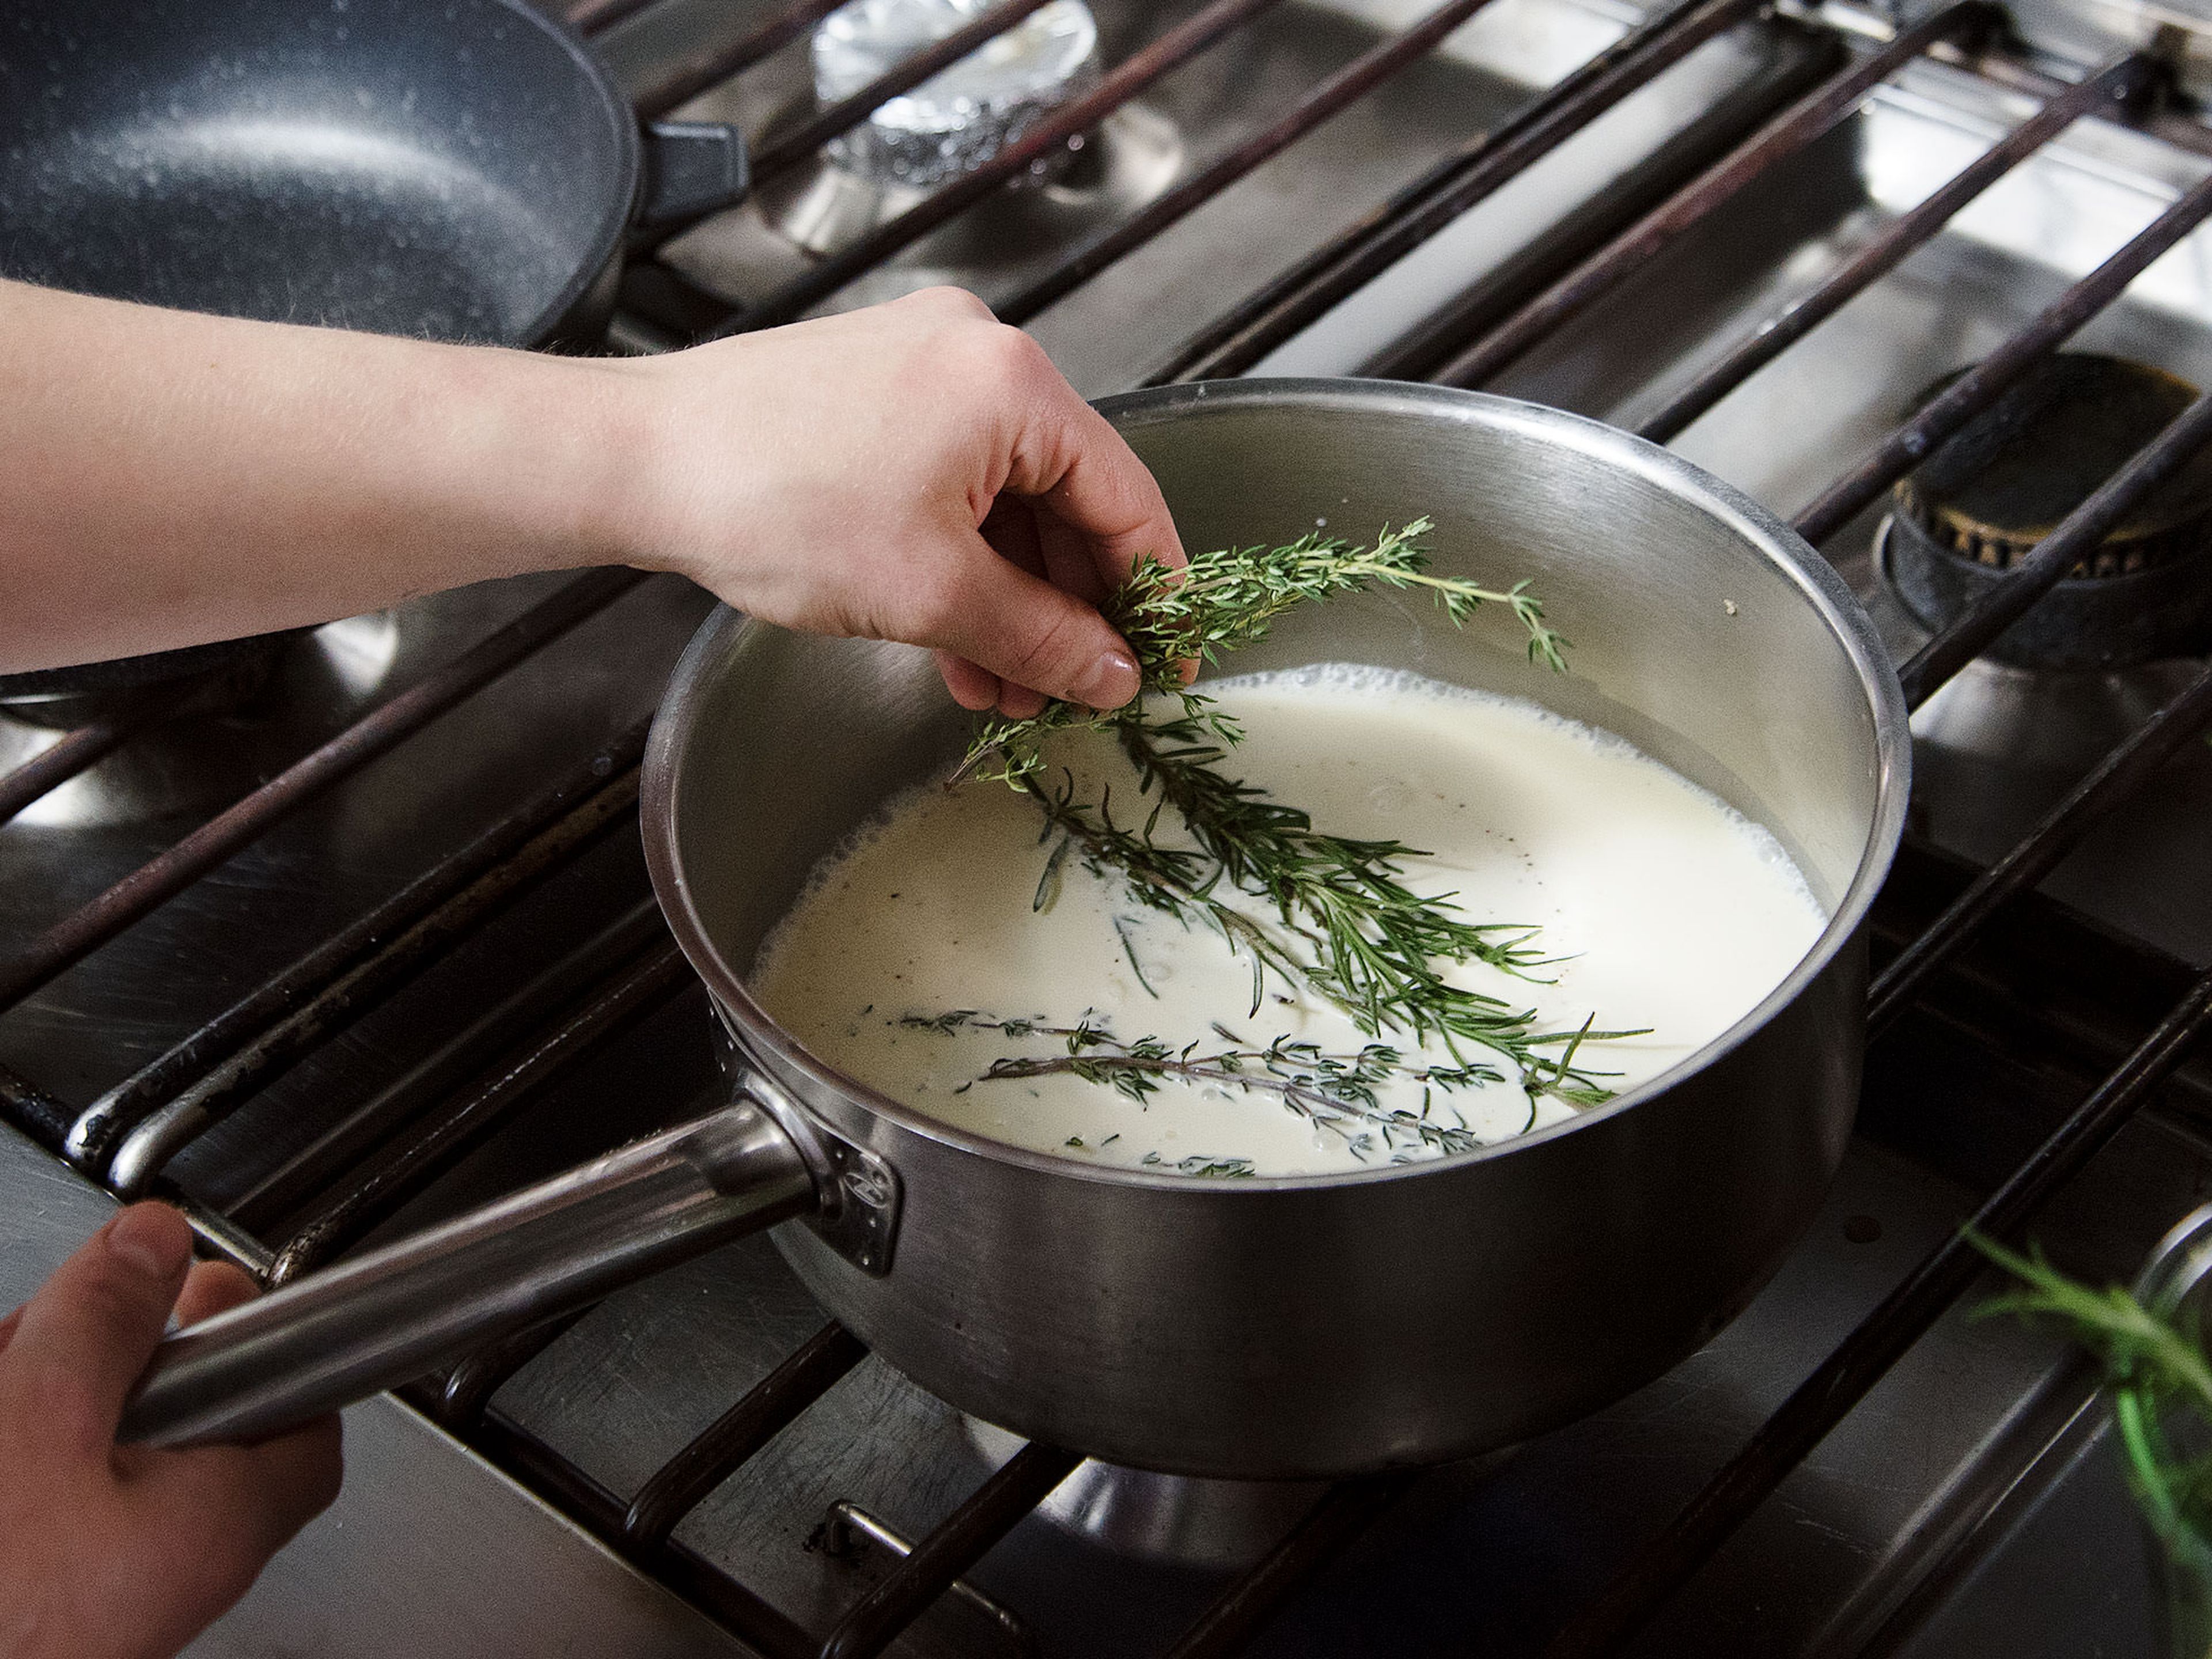 Preheat oven to 90°C/195°F. Separate egg yolks from egg whites, then beat egg yolks. Transfer cream and milk to a saucepan and add thyme, rosemary, and some sugar, salt, and pepper. Bring to a boil, then strain the mixture into a large mixing bowl. Mix in goat cheese and stir until melted.